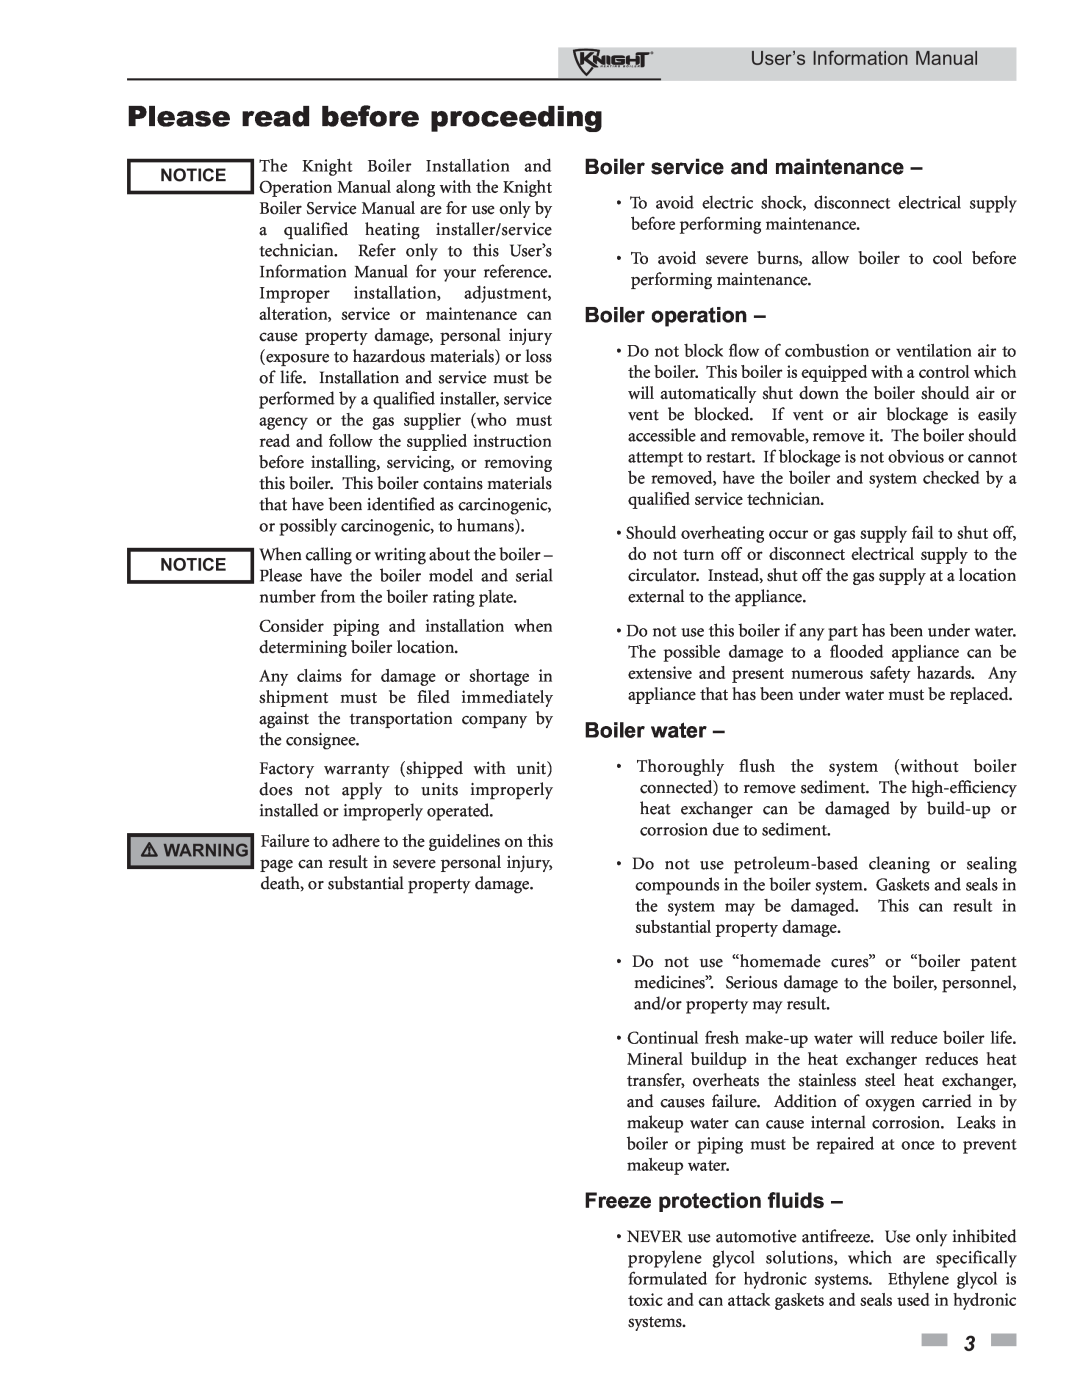 Lochinvar 80 - 285 manual Please read before proceeding, Boiler service and maintenance, Boiler operation, Boiler water 